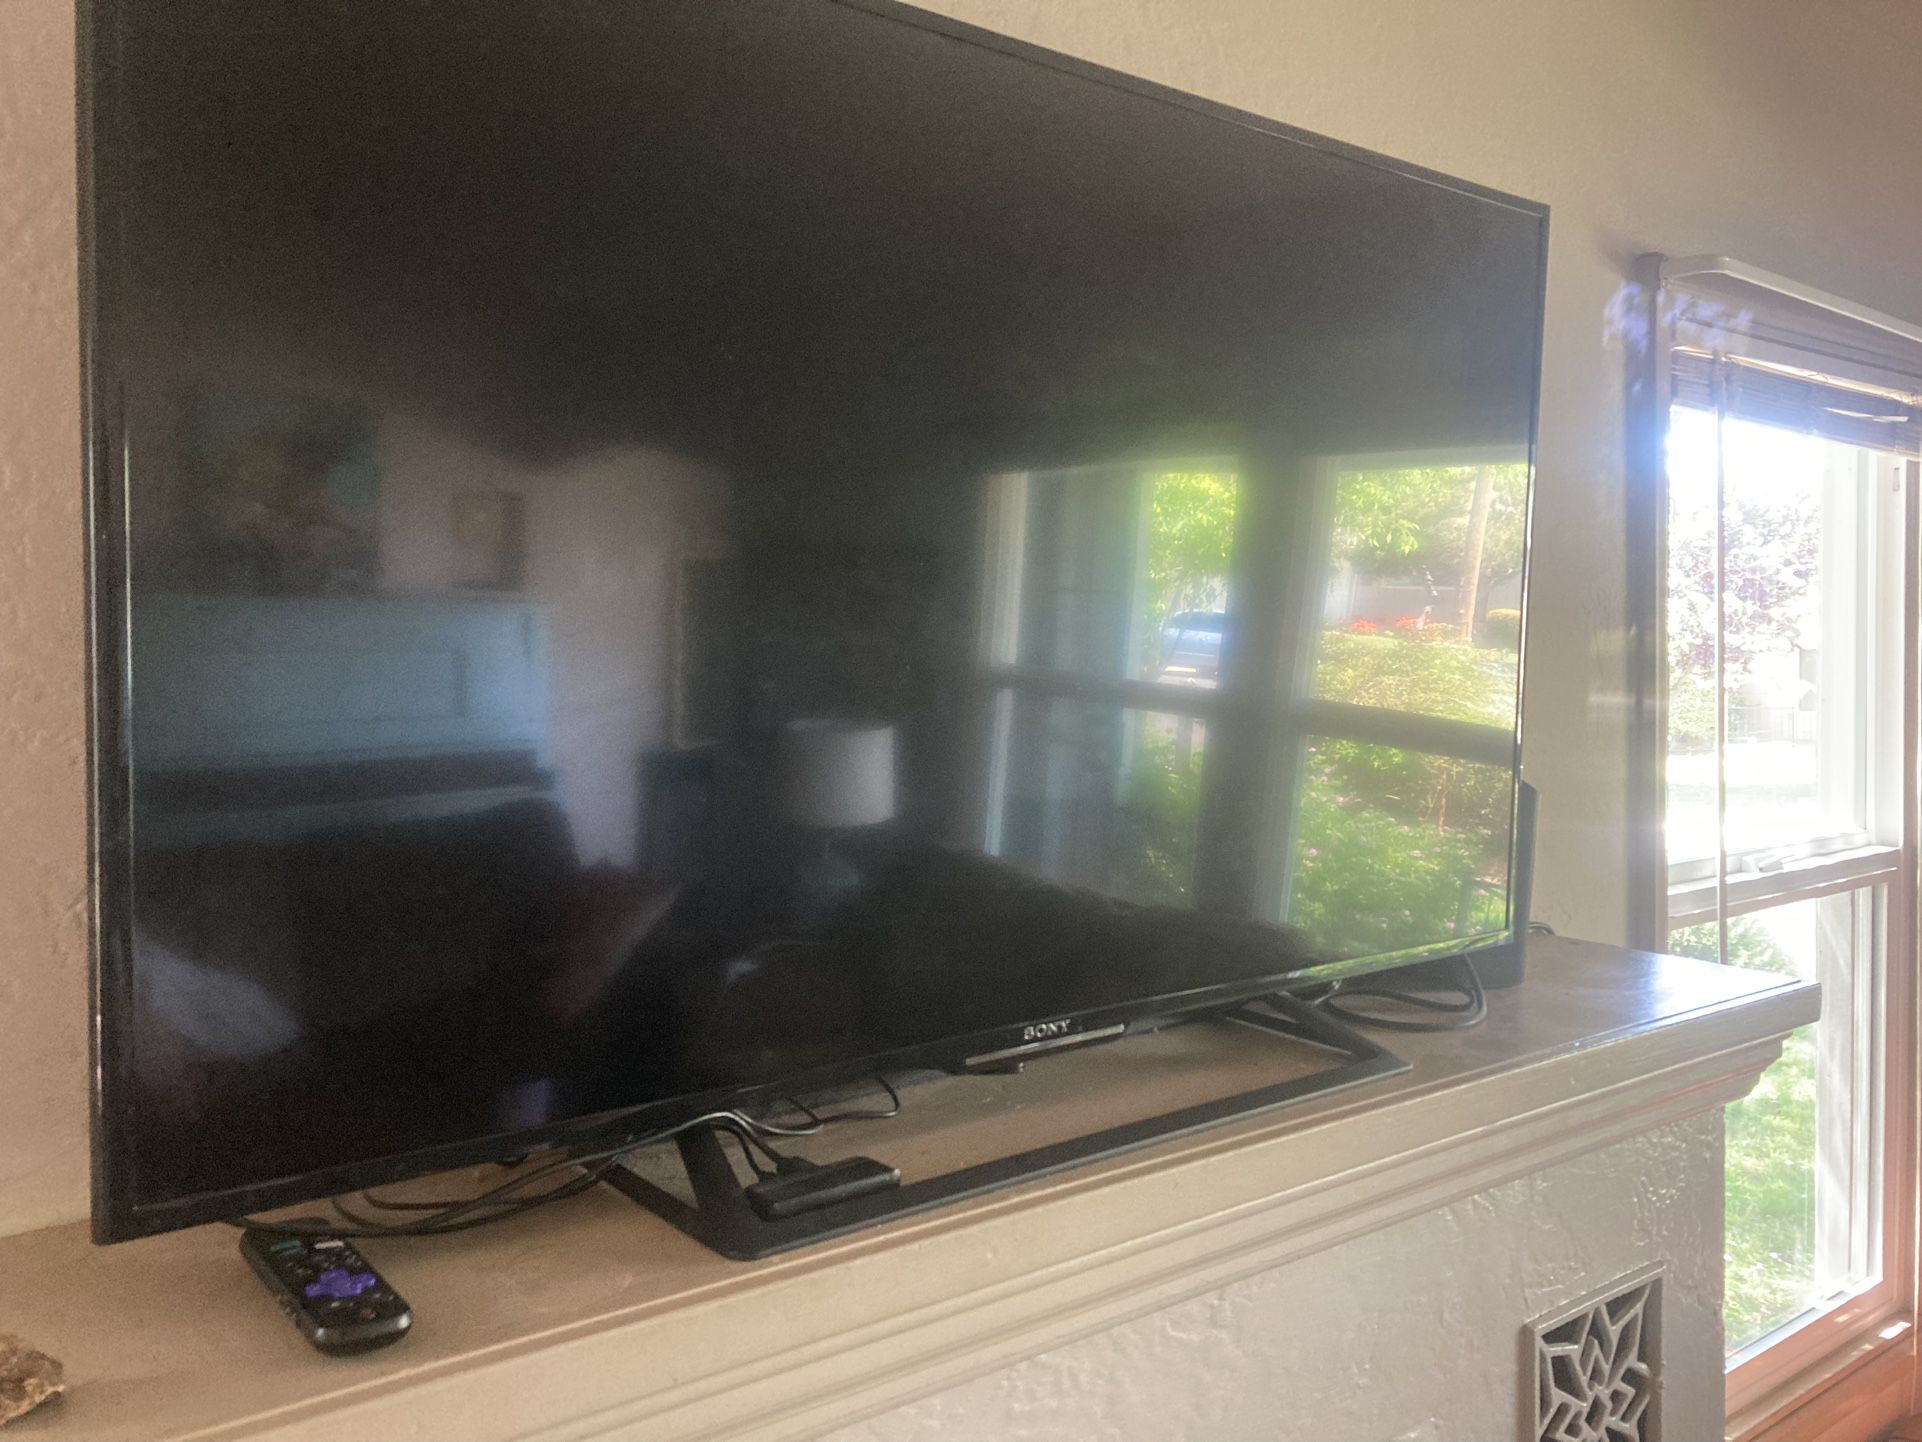 42 Inch Sony Flatscreen With Roku And Remote